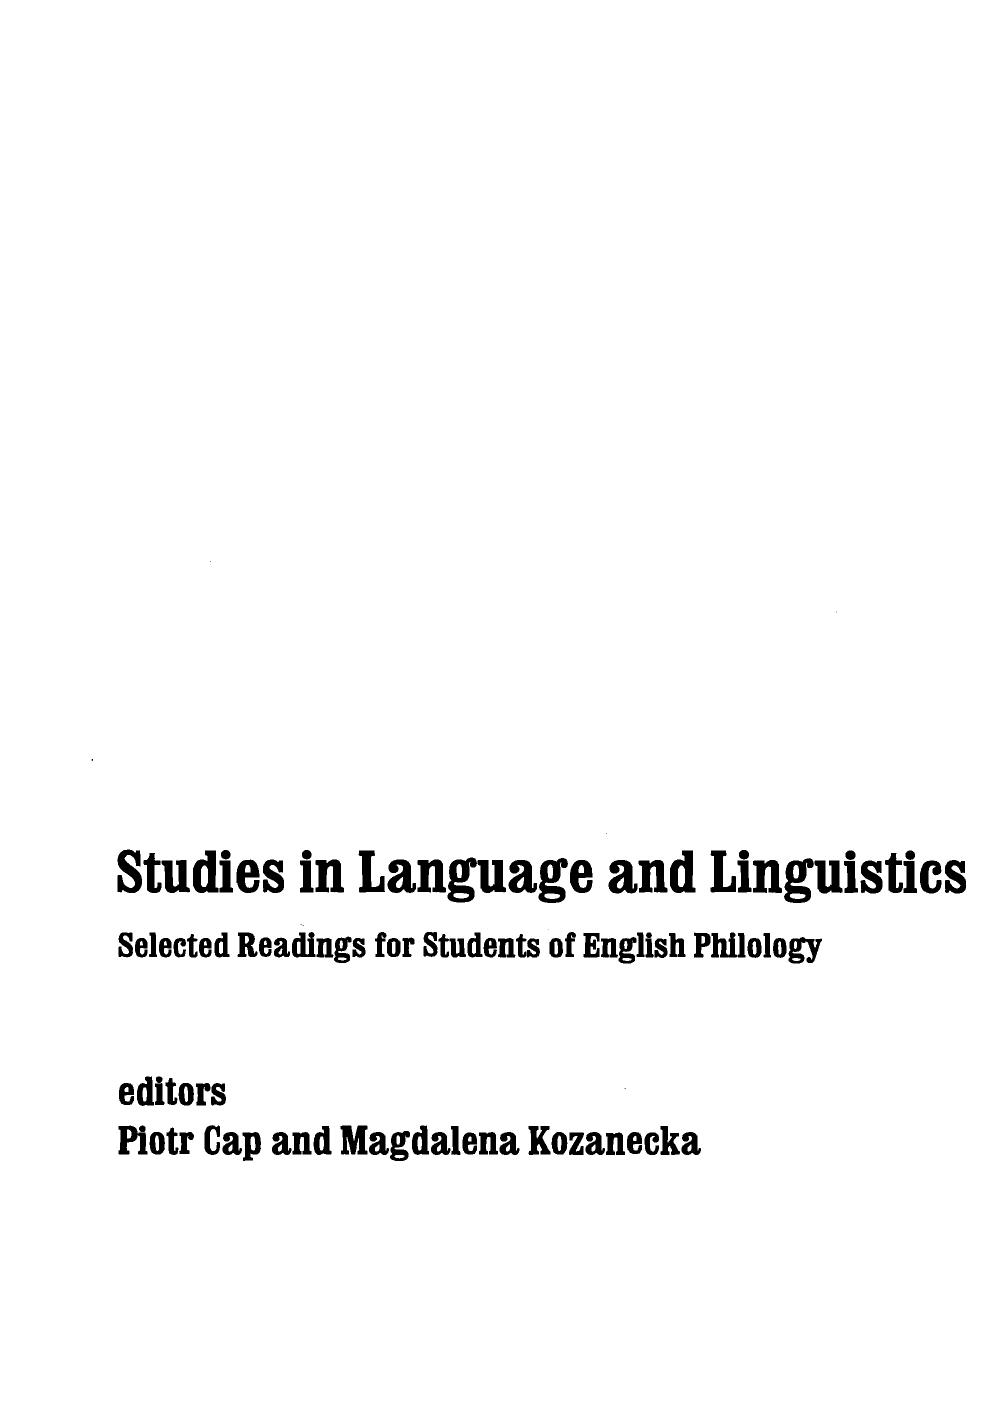 Studies in Language and Linguistics. Selected Readings for Students of English Philology